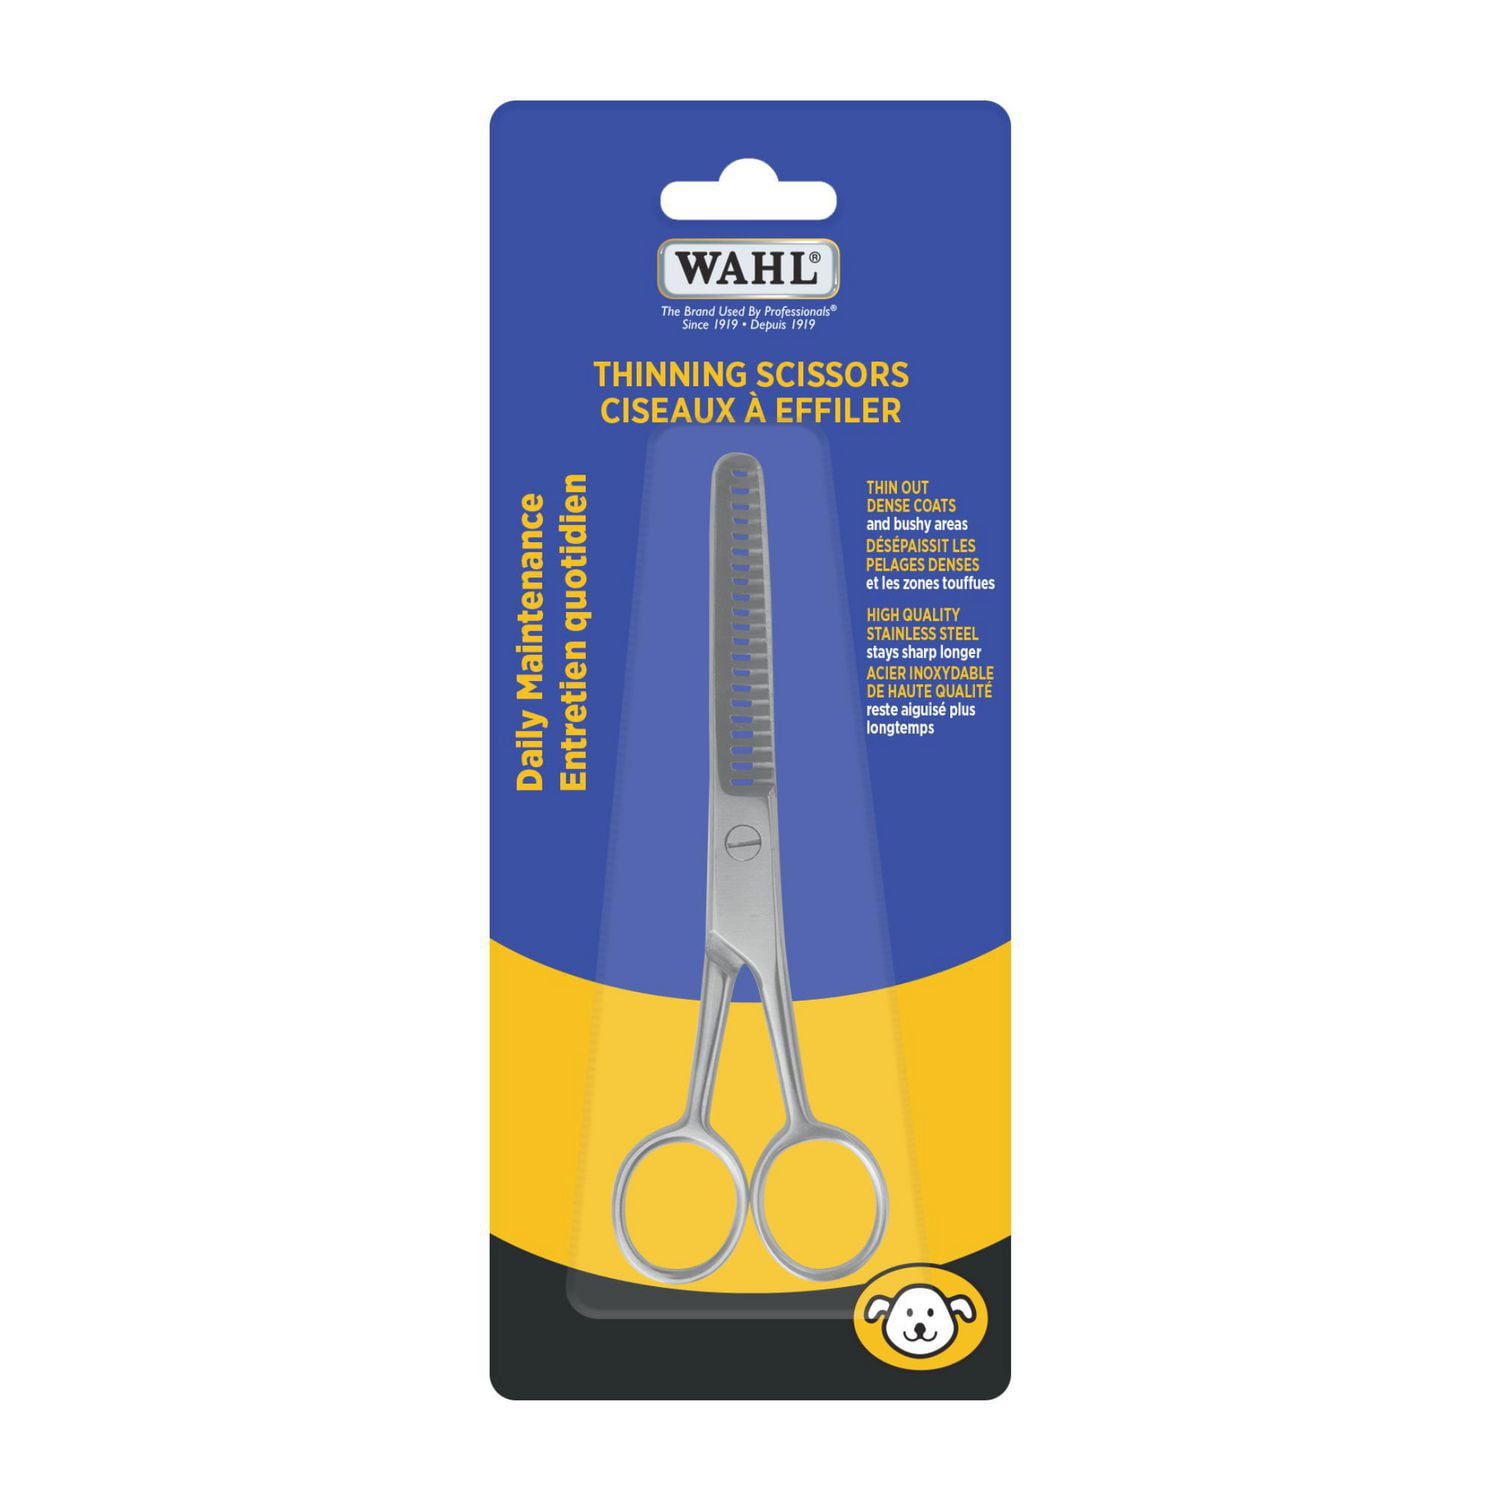 Wahl Dog Thinning Scissors, For thinning out coat volume 